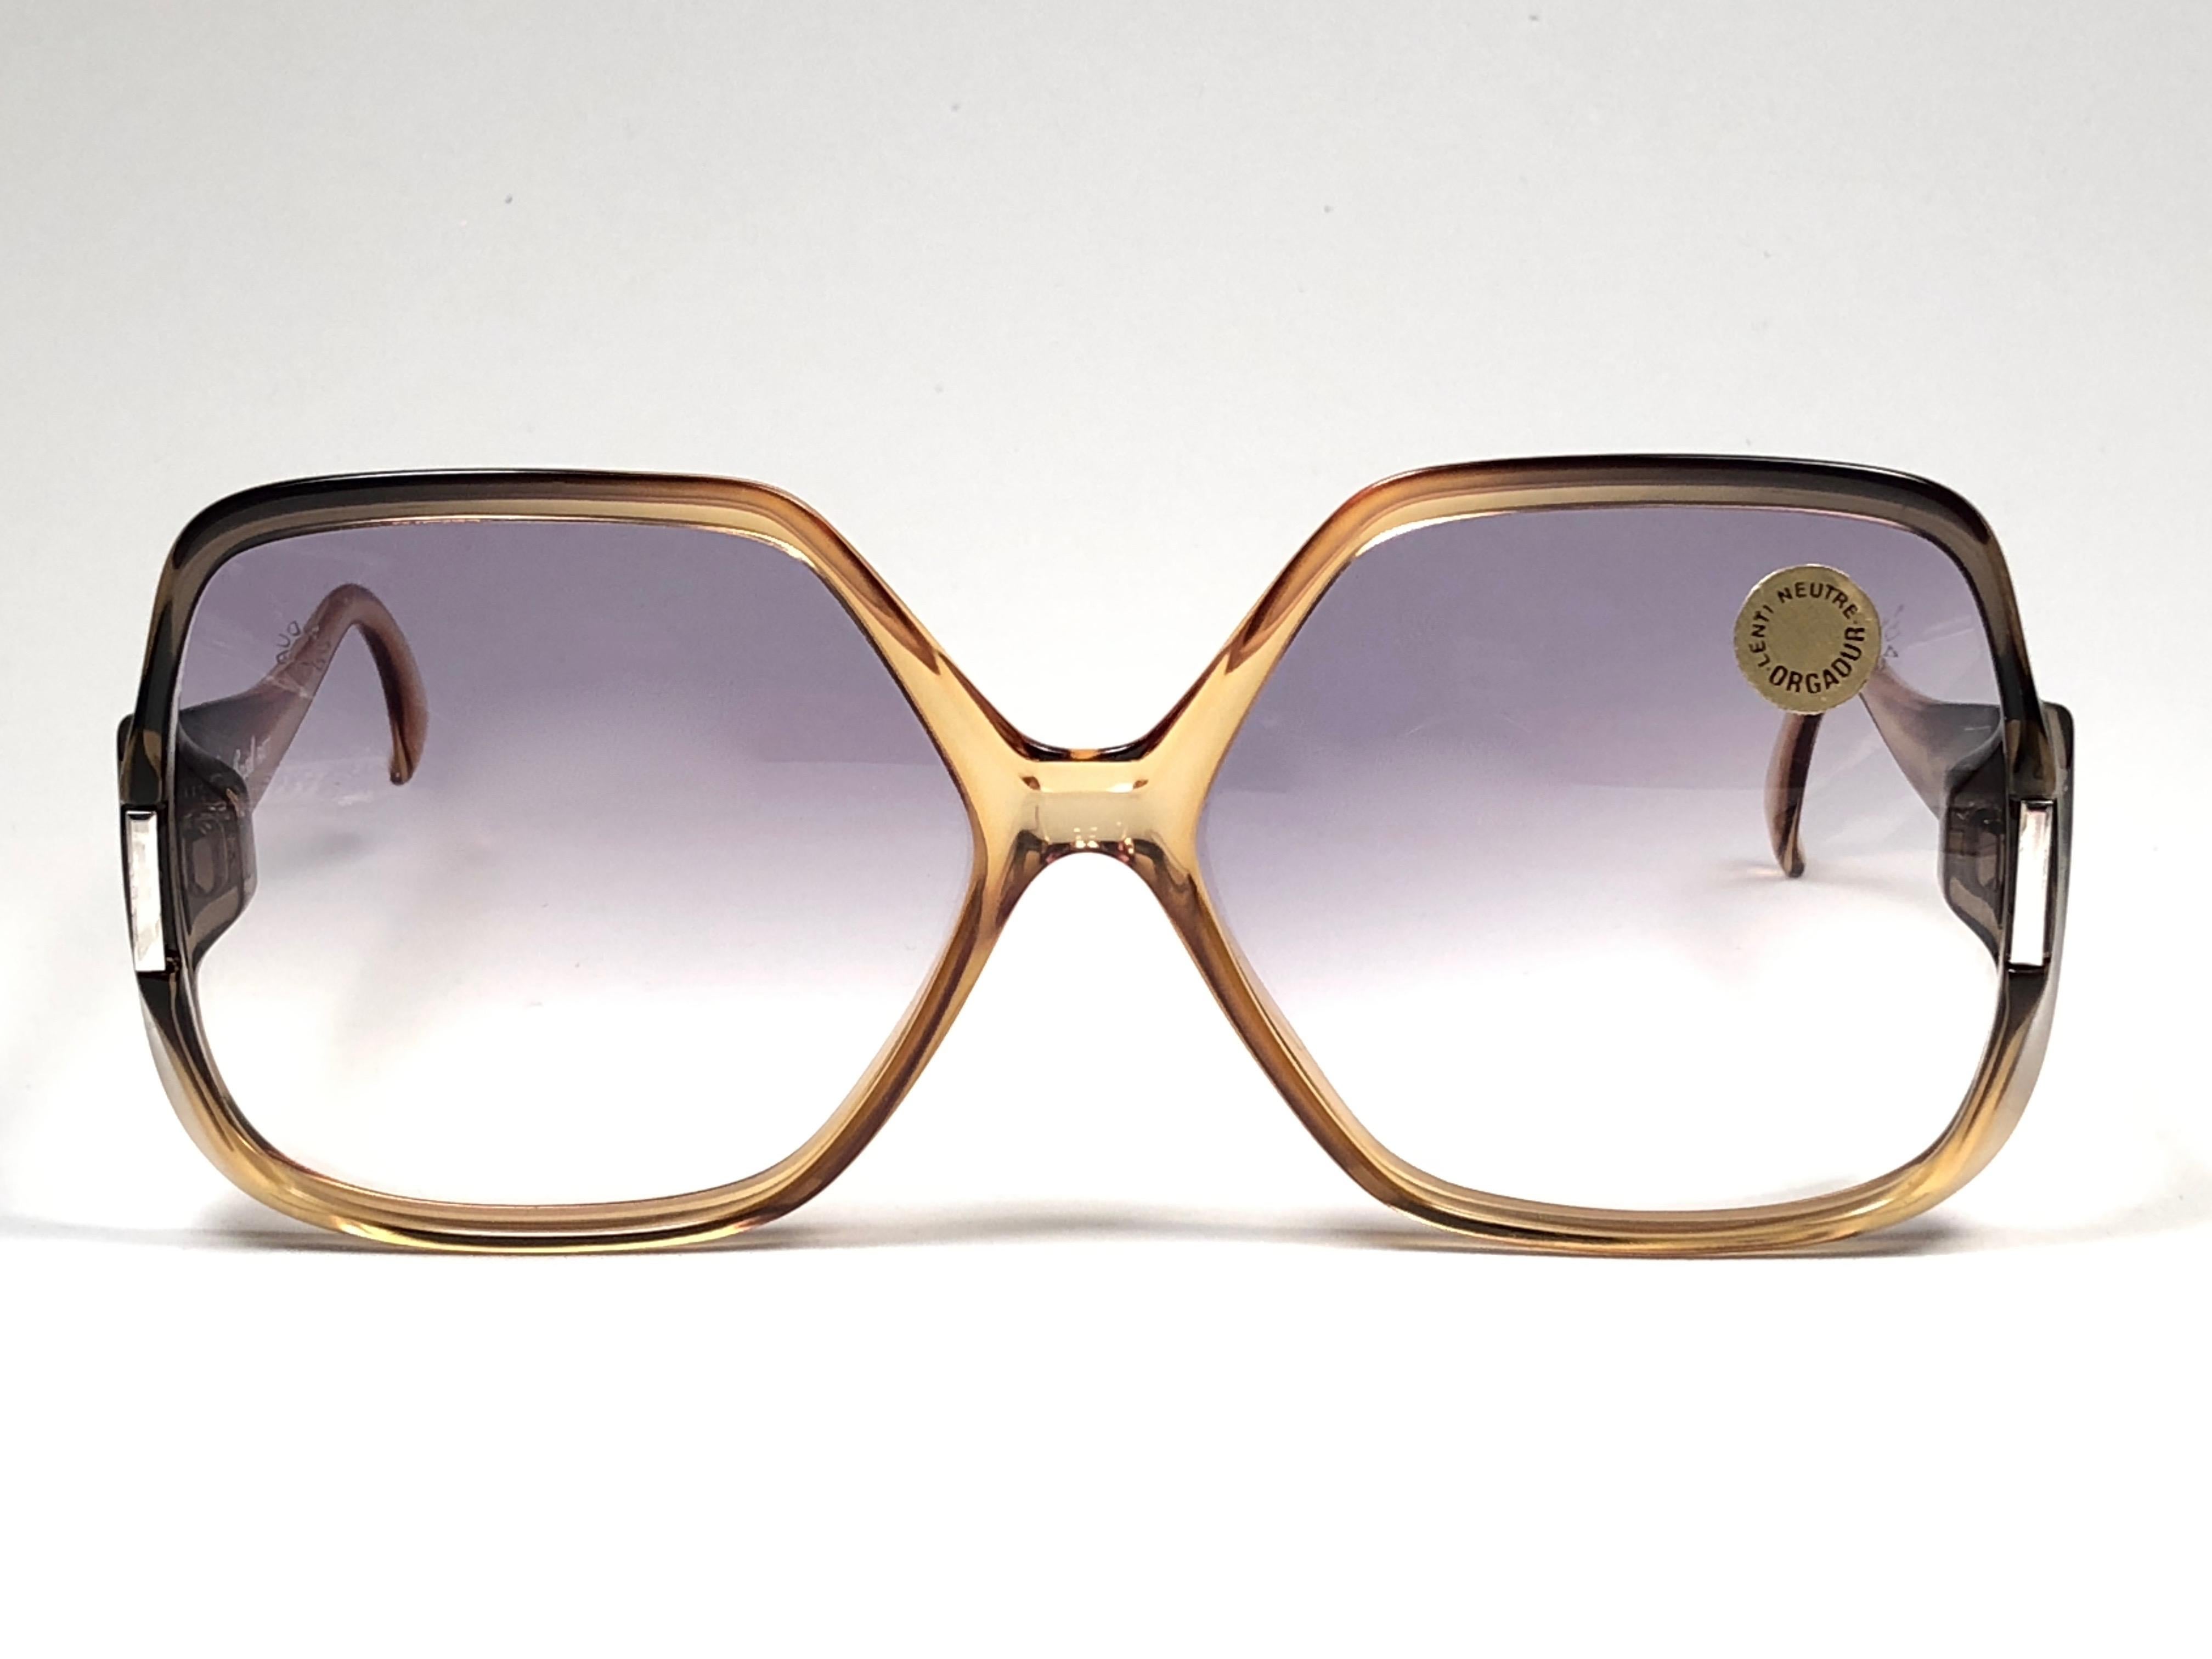 New Persol Ratti oversized frame with light gradient lenses.

Made in Italy.
 
Produced and design in 1990's.

